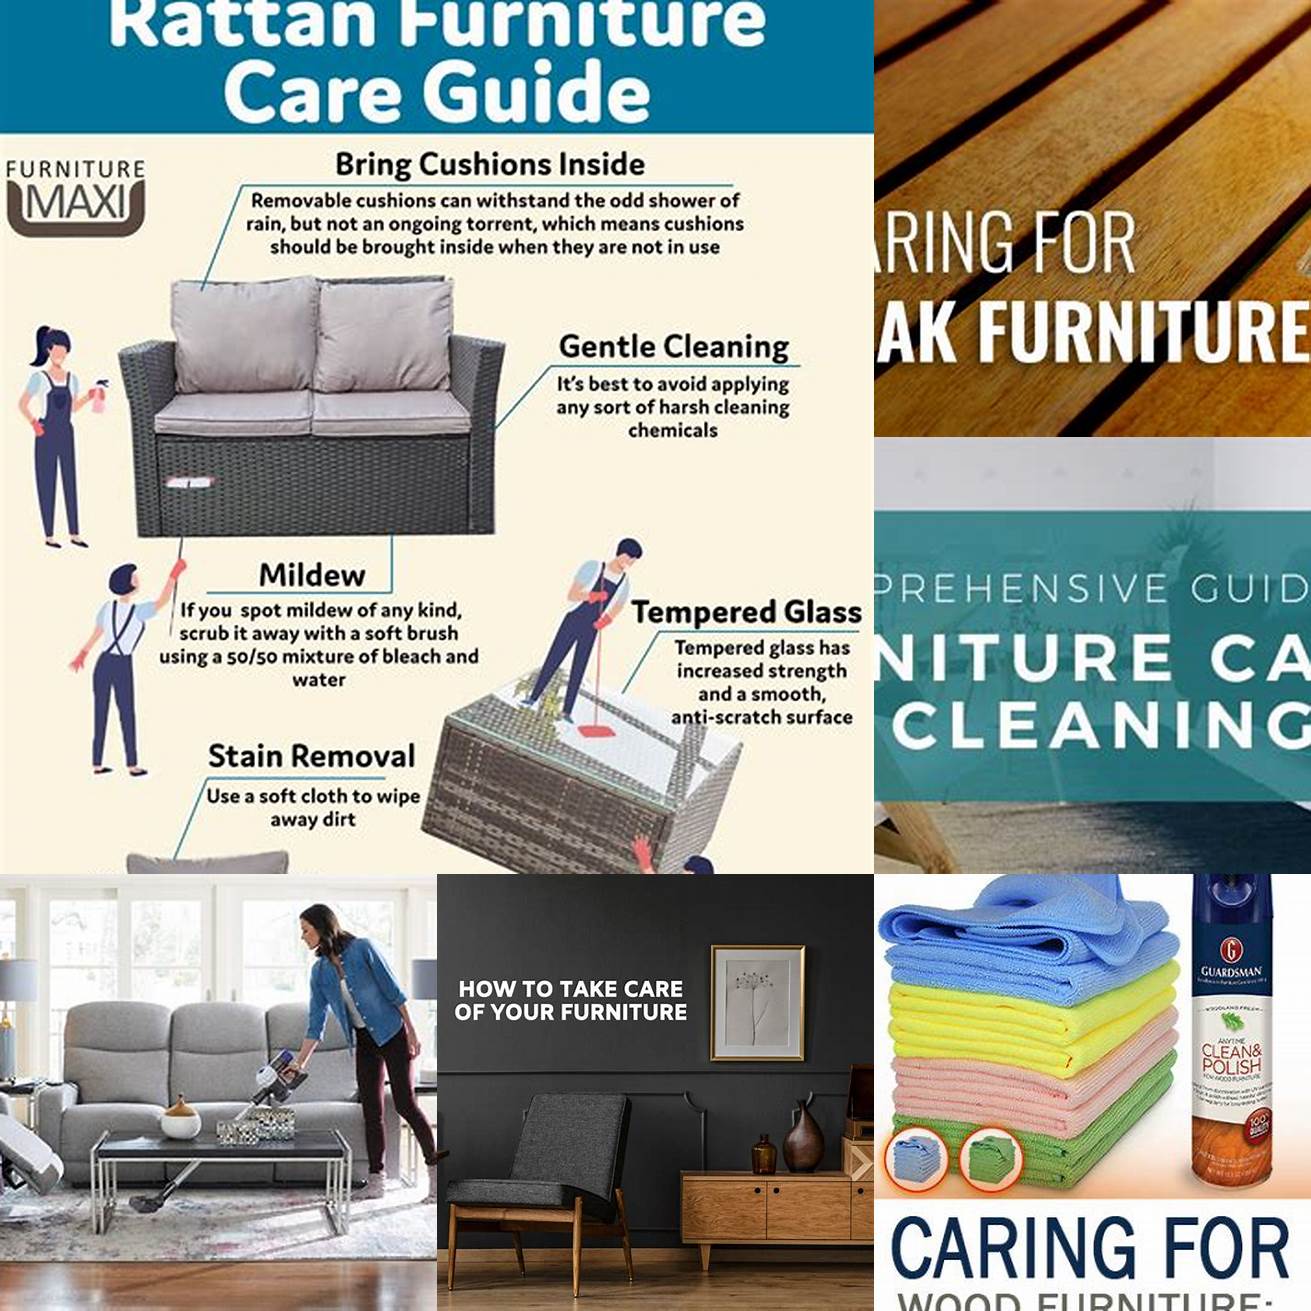 Caring for Your Furniture